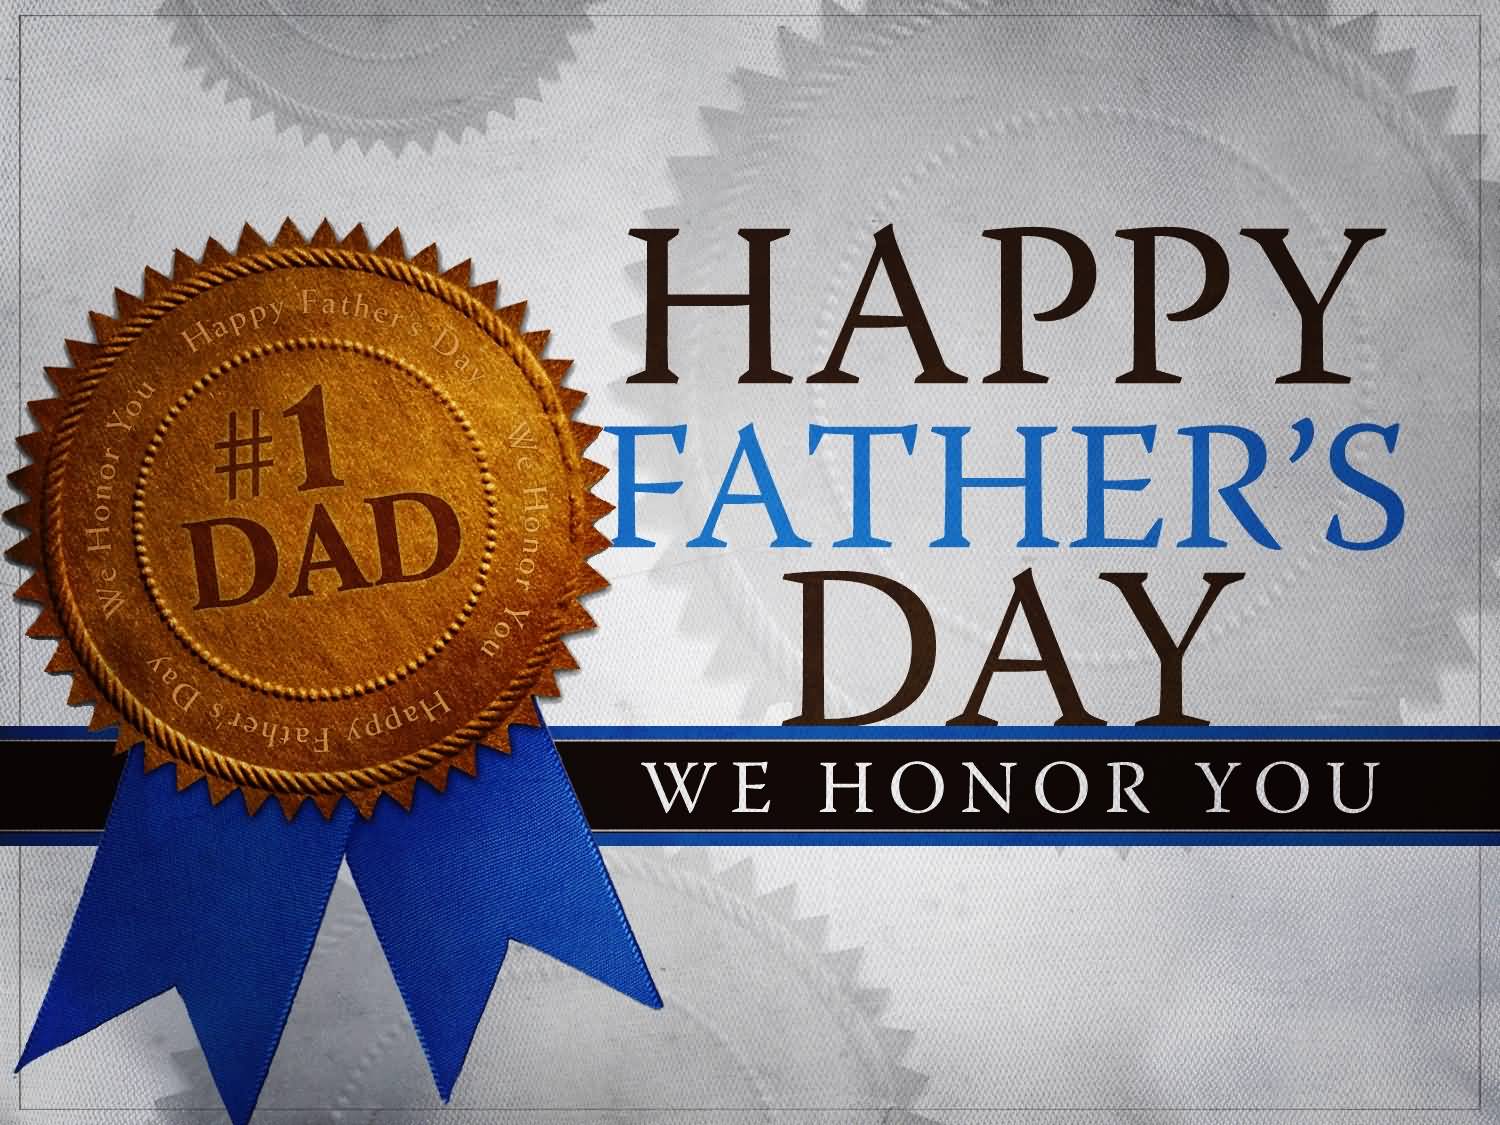 We honor You Dad - Happy Fathers Day